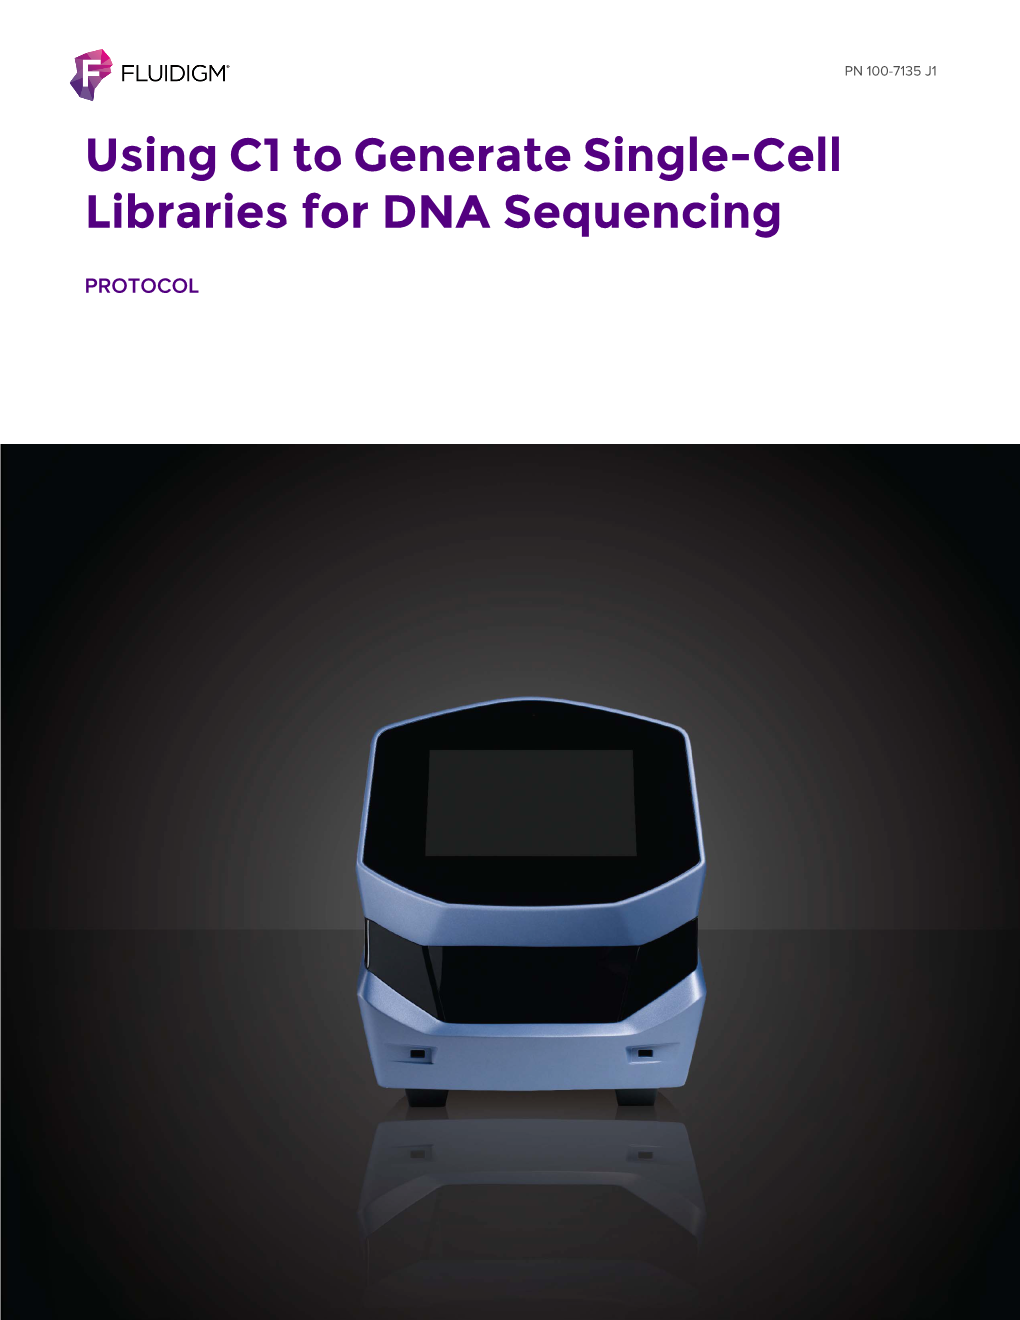 Using C1 to Generate Single-Cell Libraries for DNA Sequencing